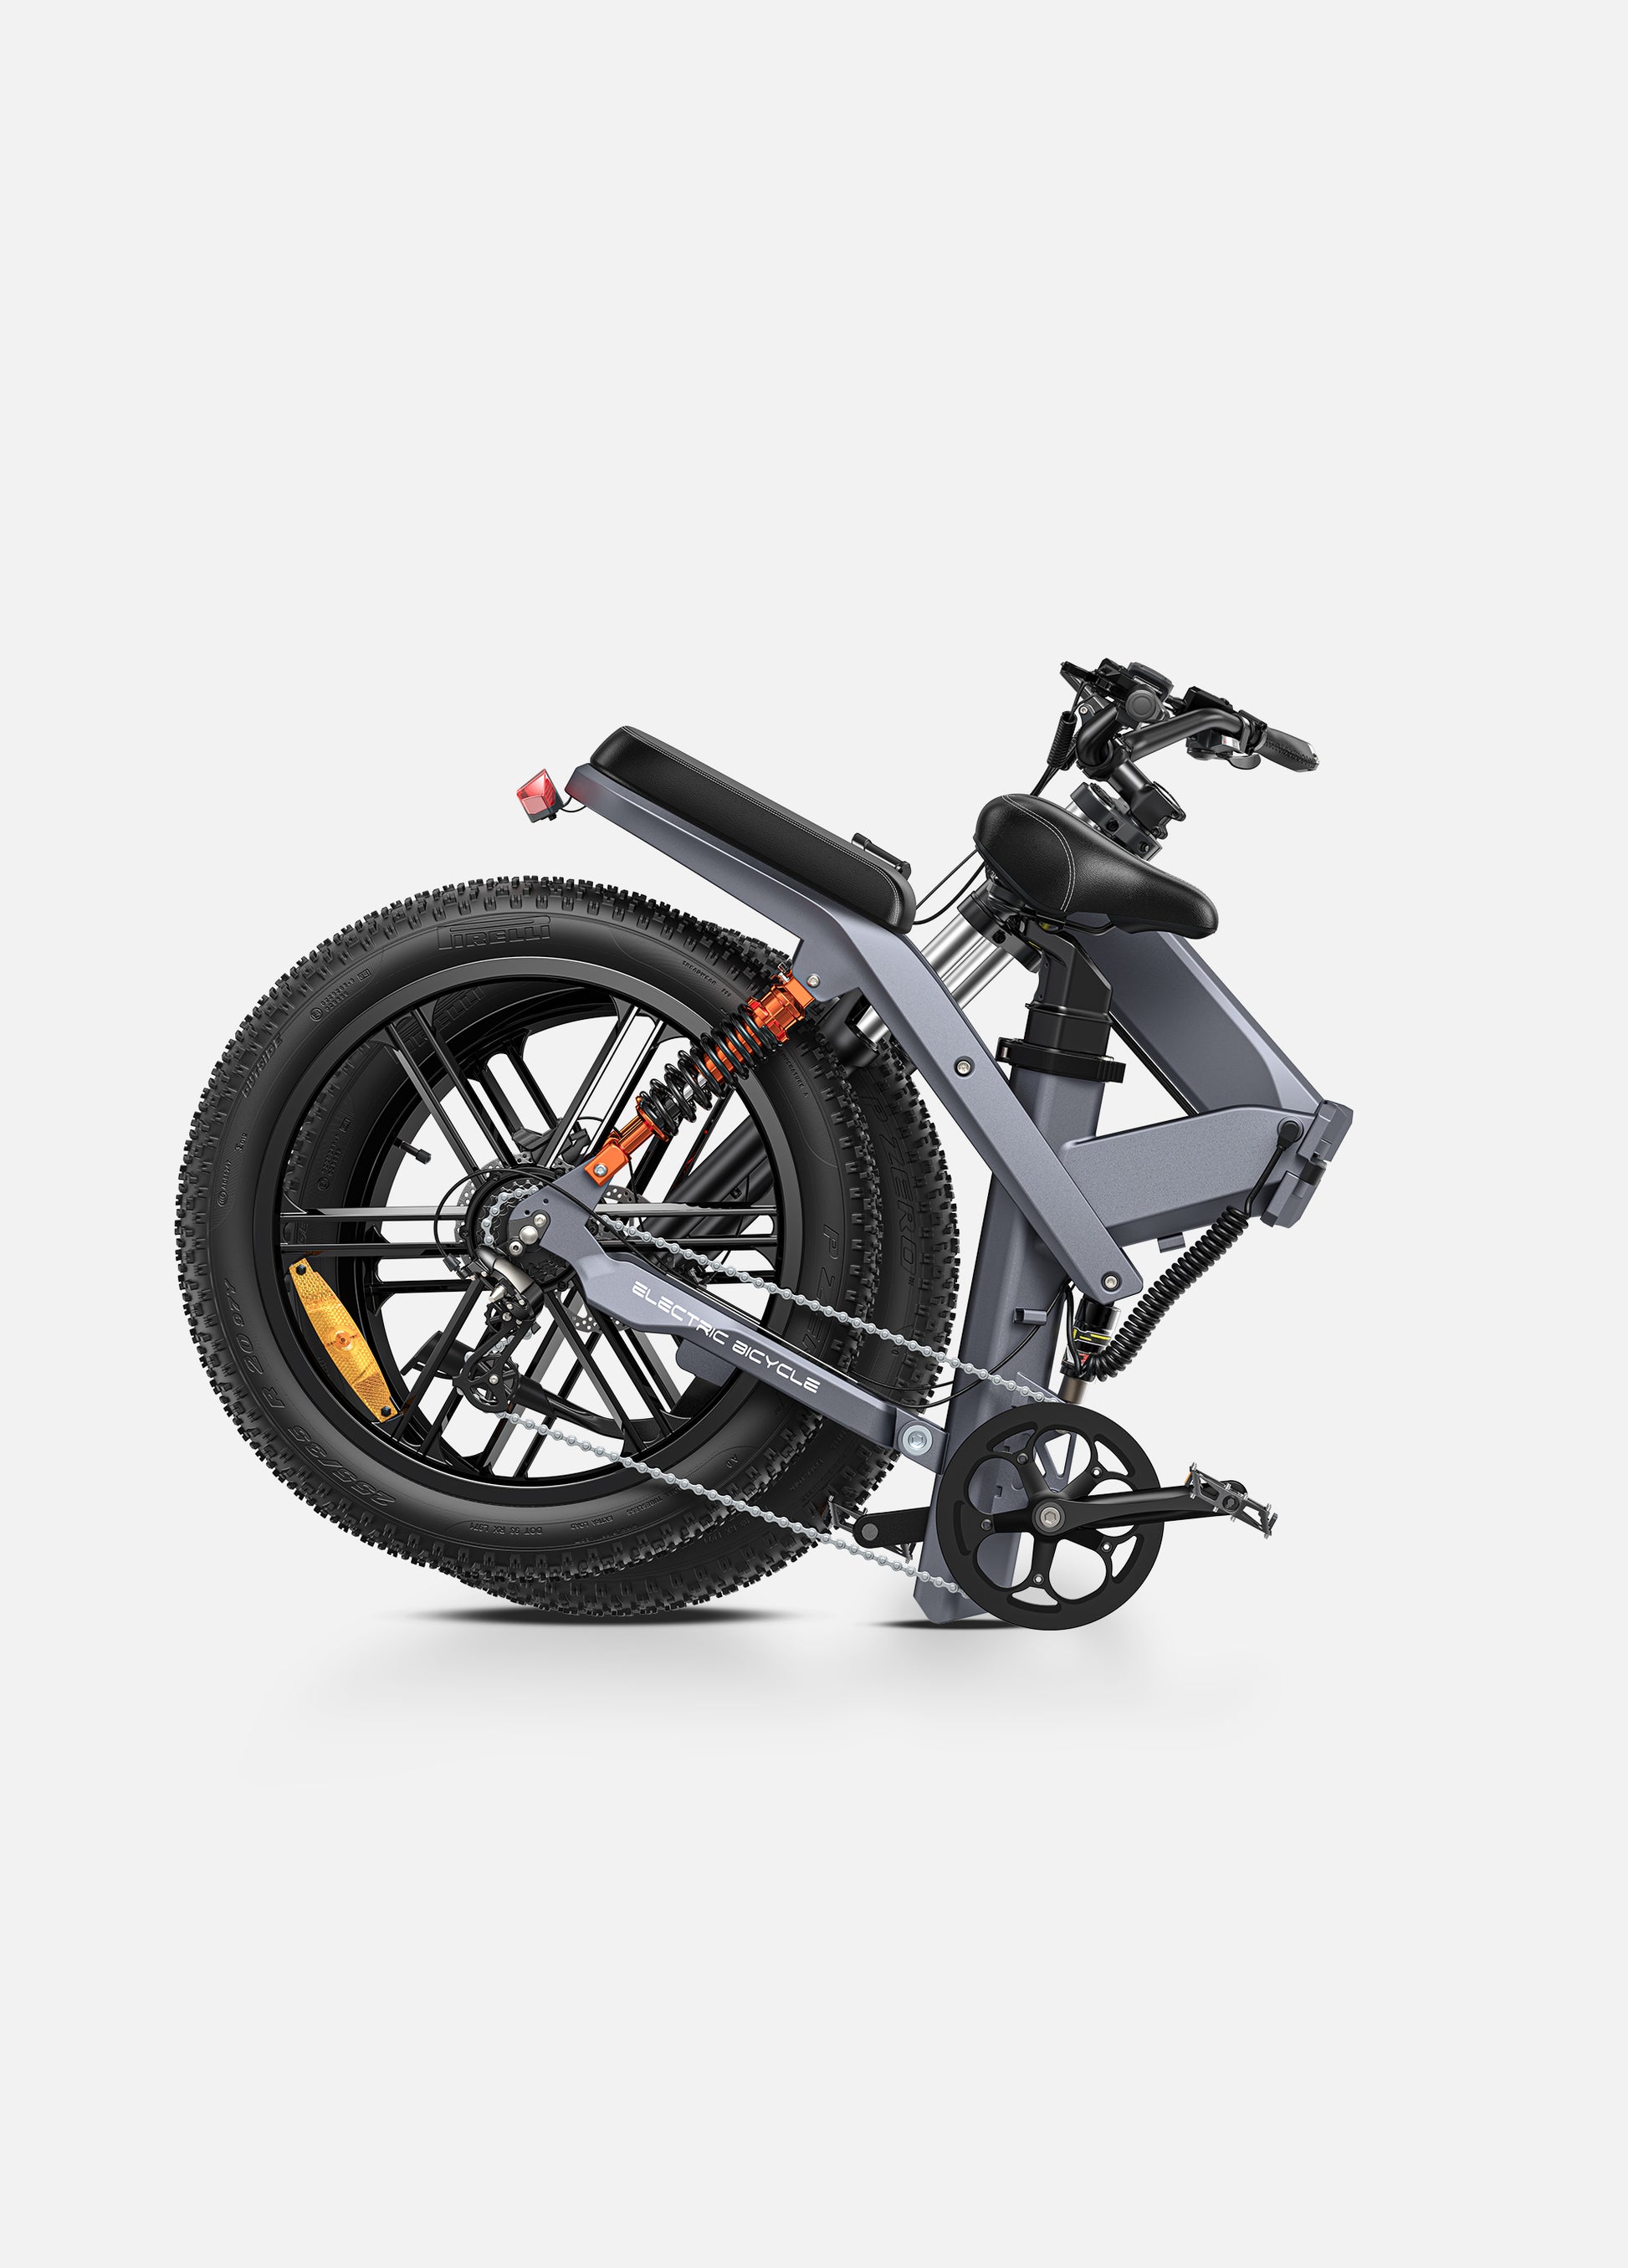 Folded Engwe X26 ebike emphasizing its compact design for easy storage and transport.